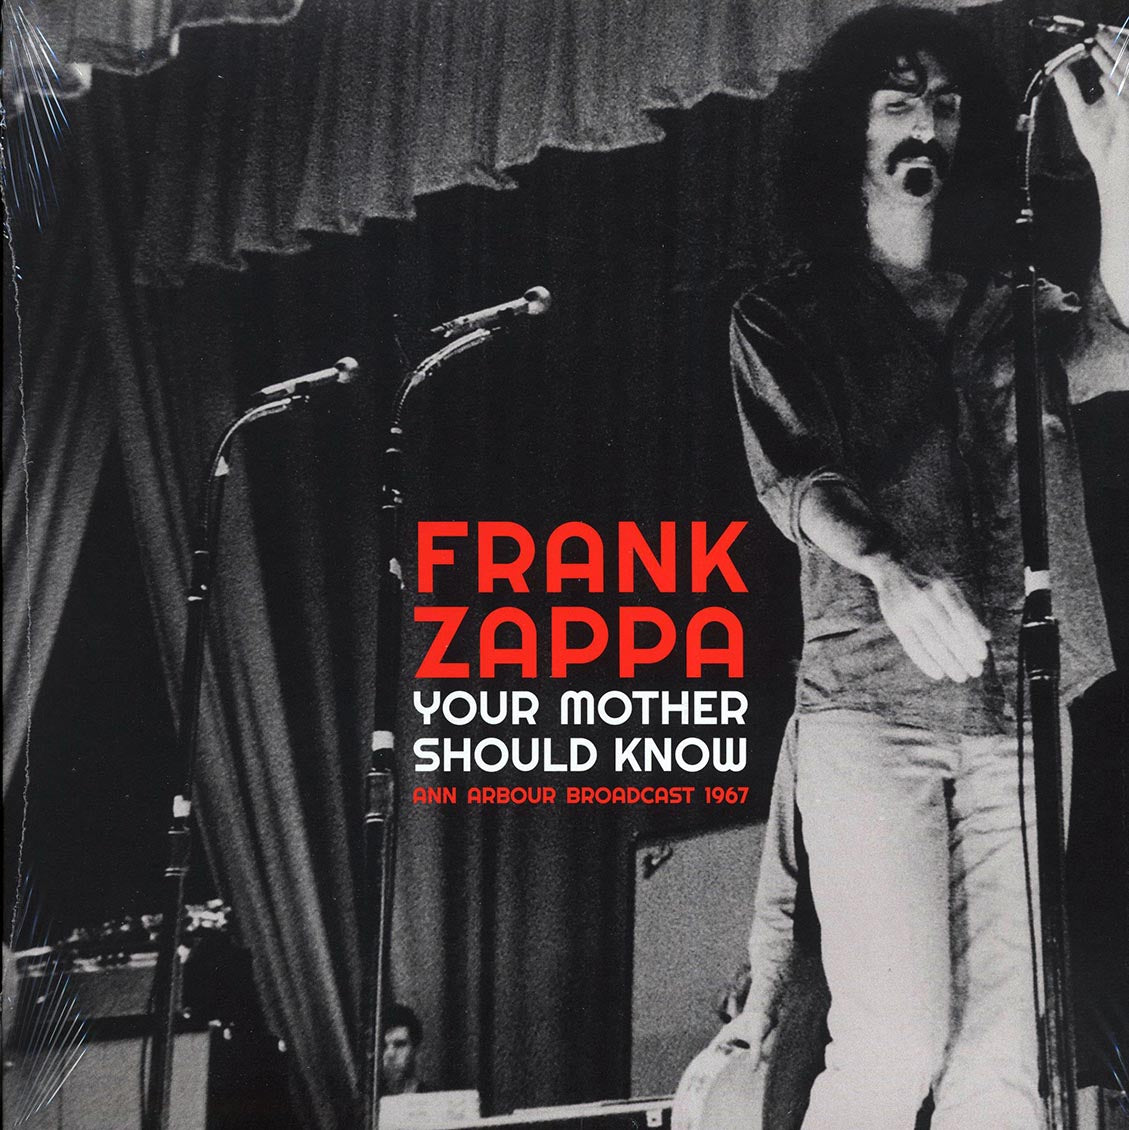 Frank Zappa - Your Mother Should Know: Ann Arbor Broadcast 1967 - Vinyl LP